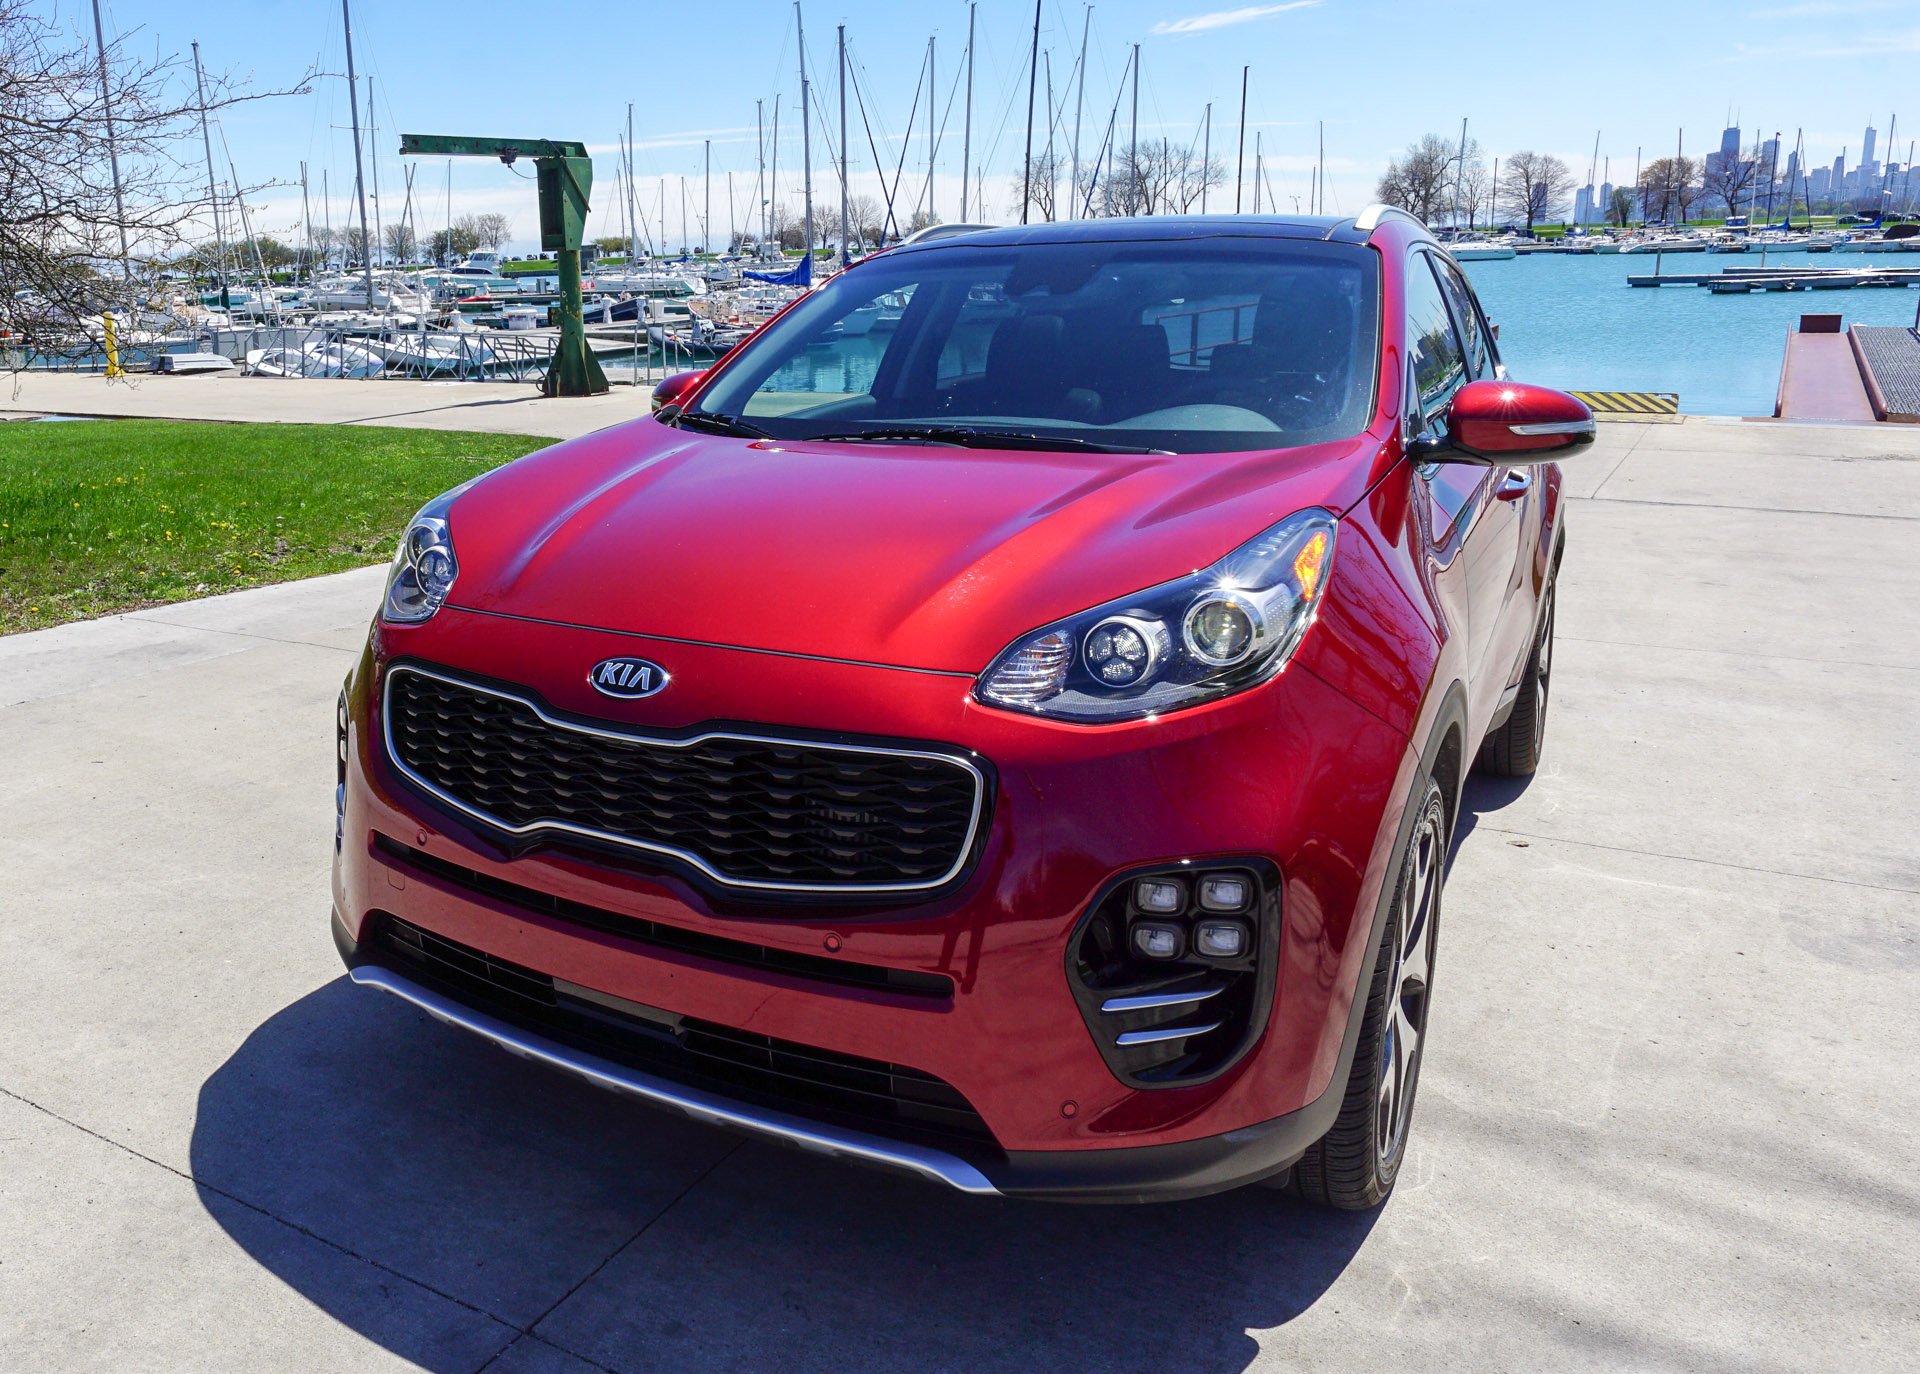 Review: 2017 Kia Sportage SX Turbo | The Thrill of Driving